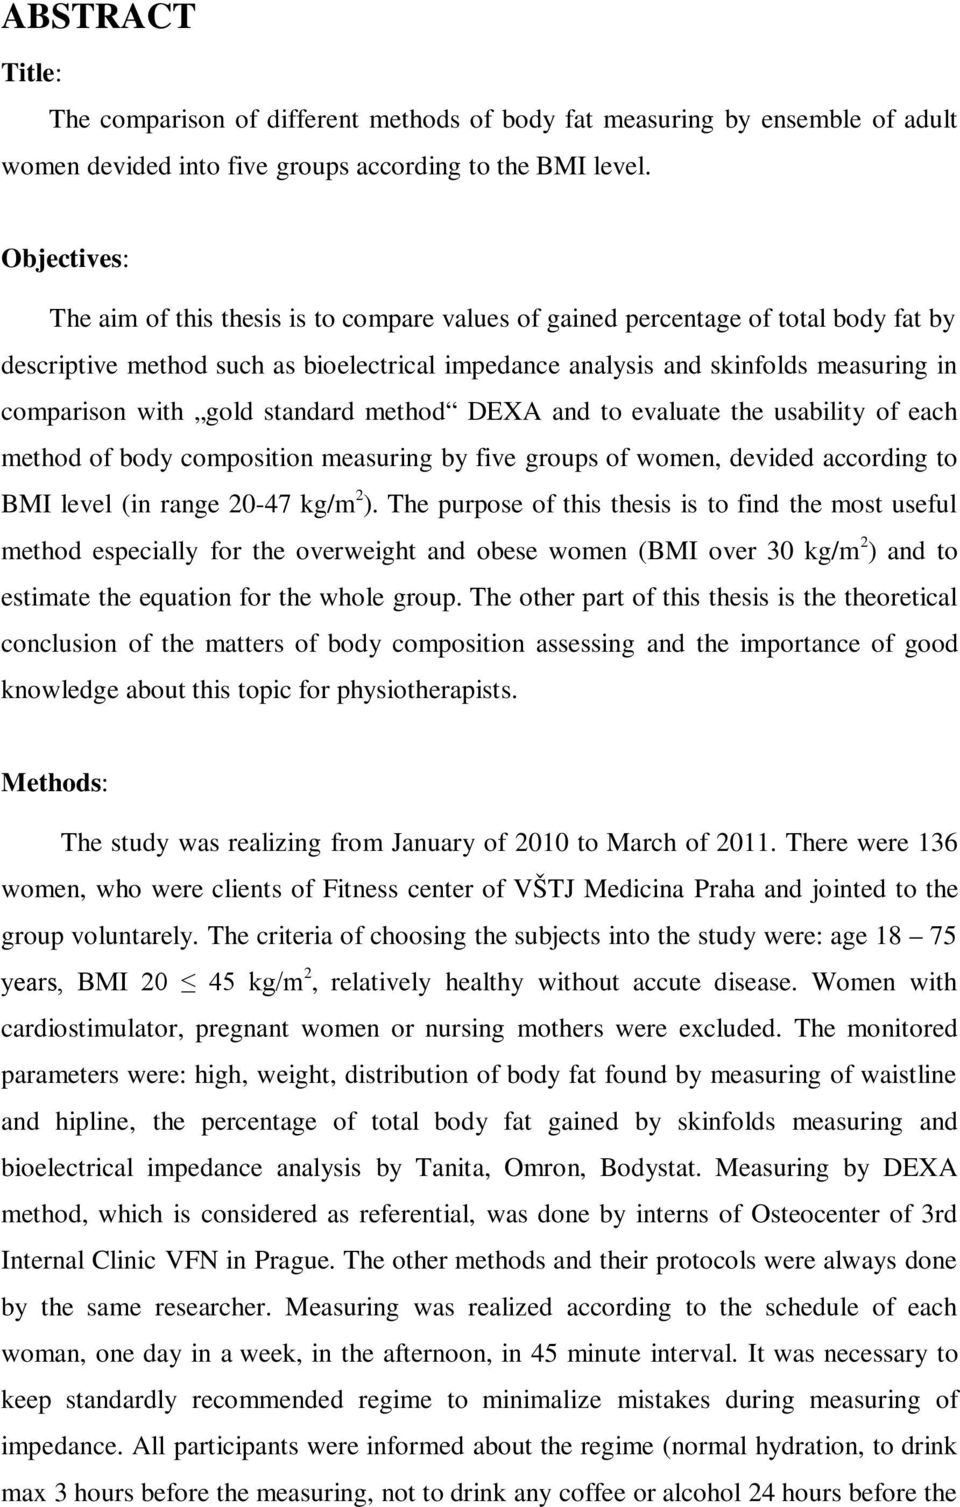 with gold standard method DEXA and to evaluate the usability of each method of body composition measuring by five groups of women, devided according to BMI level (in range 20-47 kg/m 2 ).